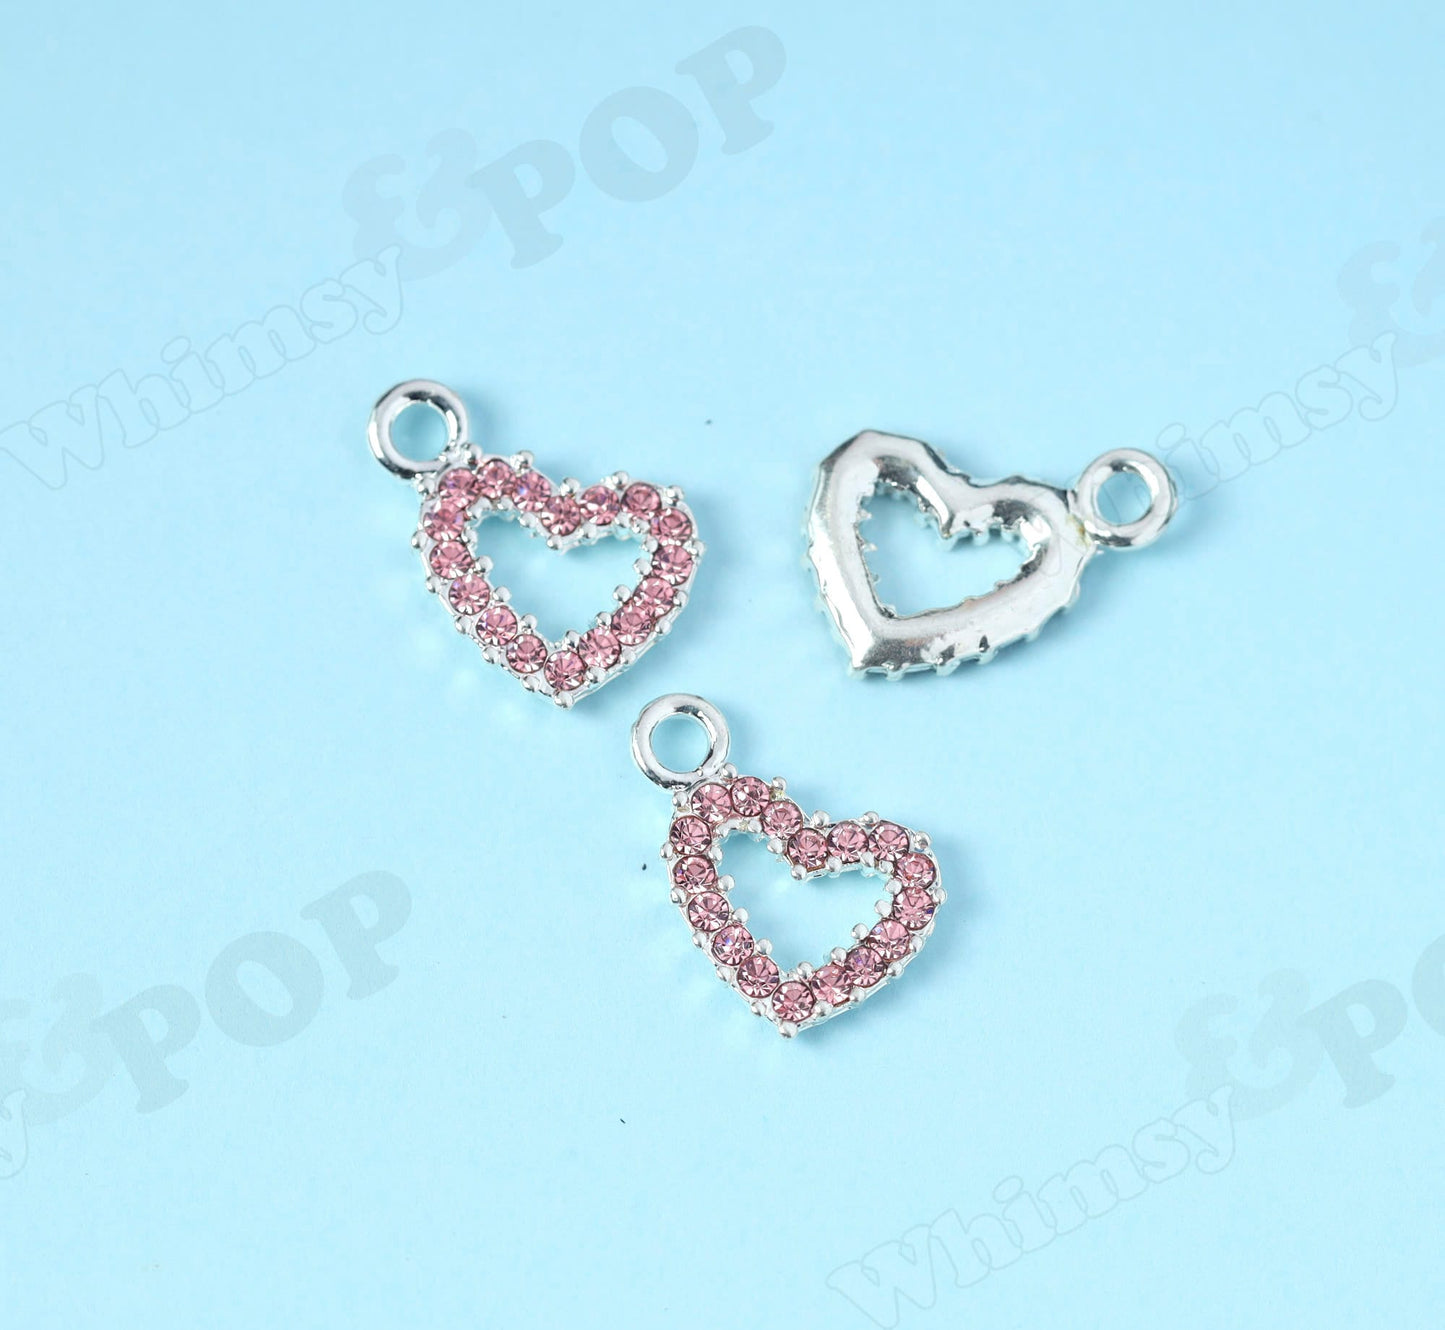 Pink Heart Charms in Many Colors for DIY Jewelry